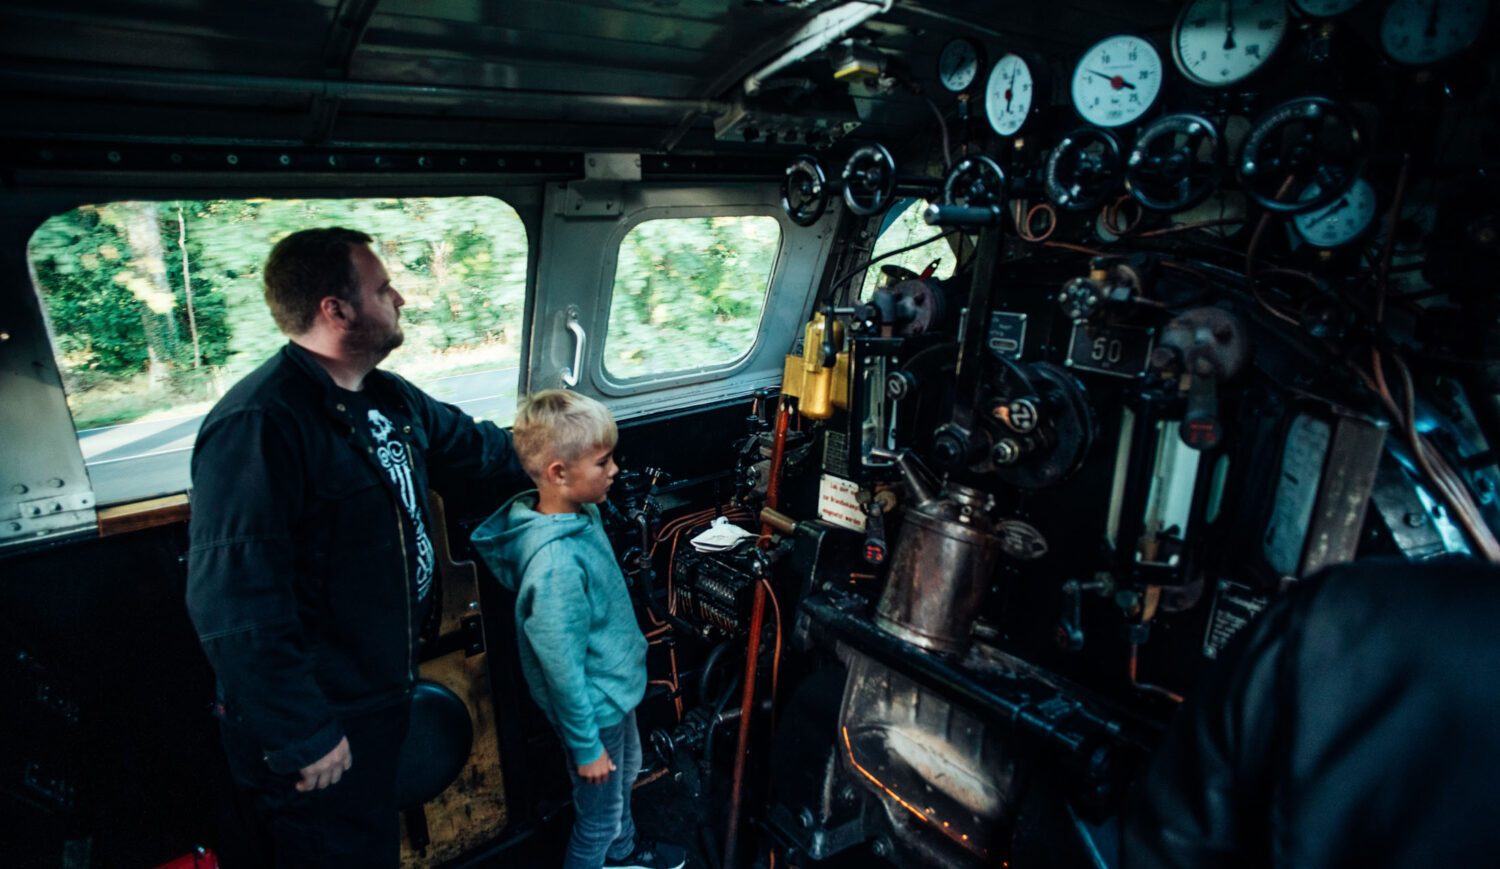 Children from the age of ten can even look over the shoulder of the train driver © TMV/Gänsicke